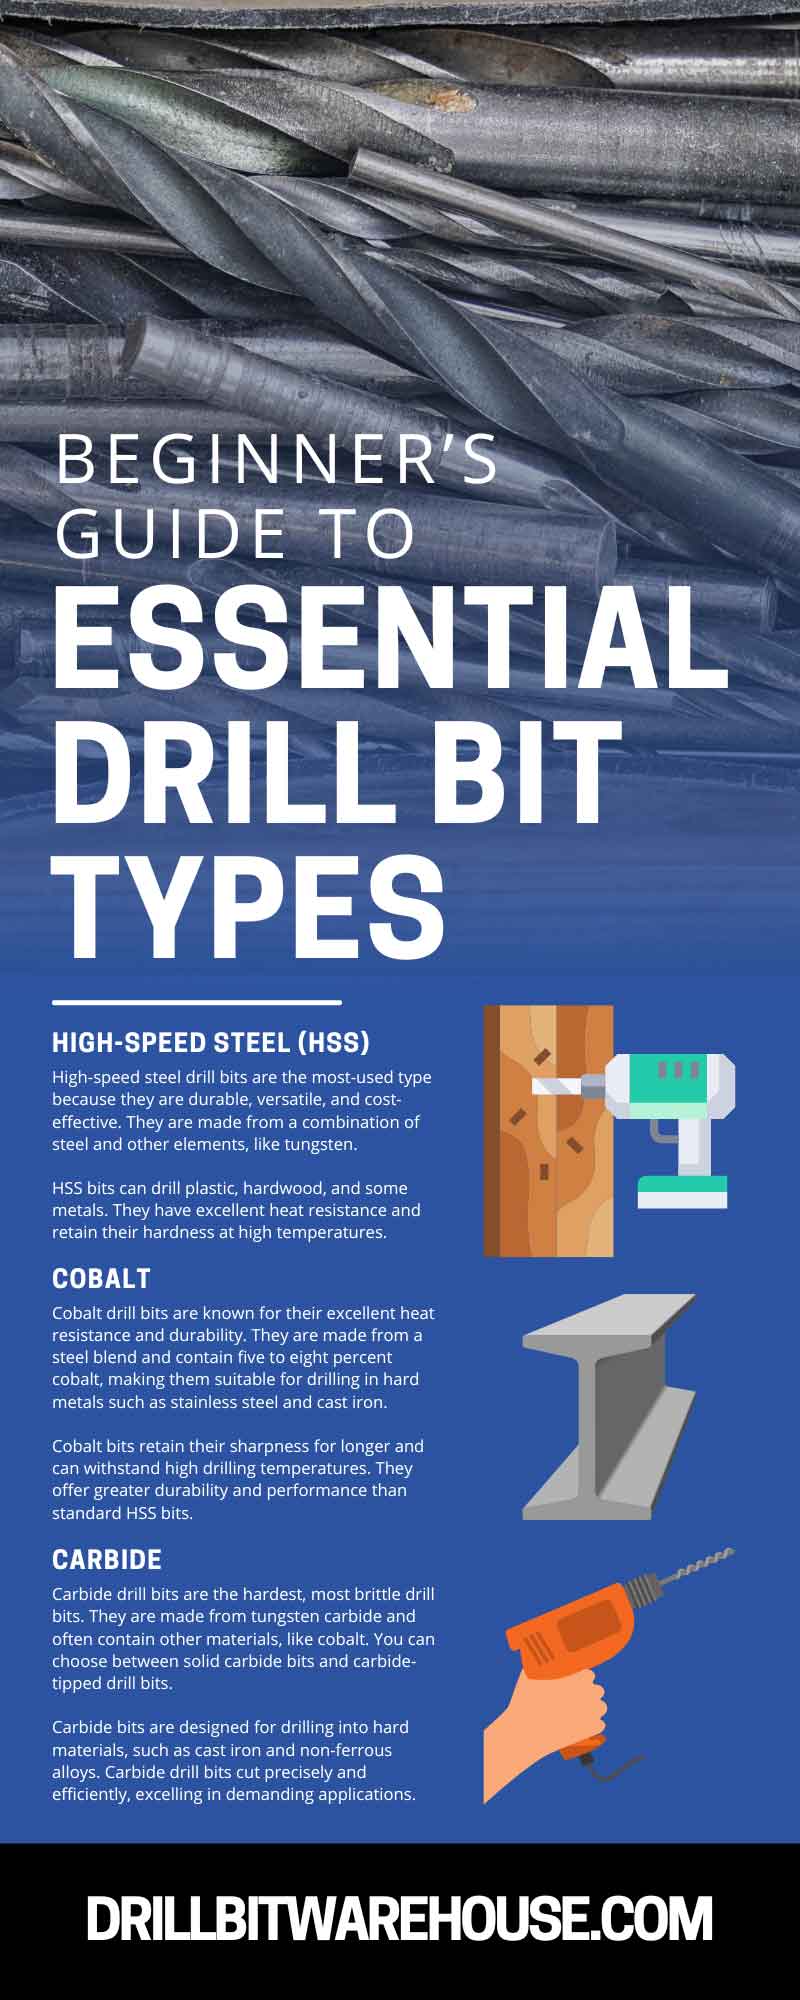 Guide to Types of Drill Bits